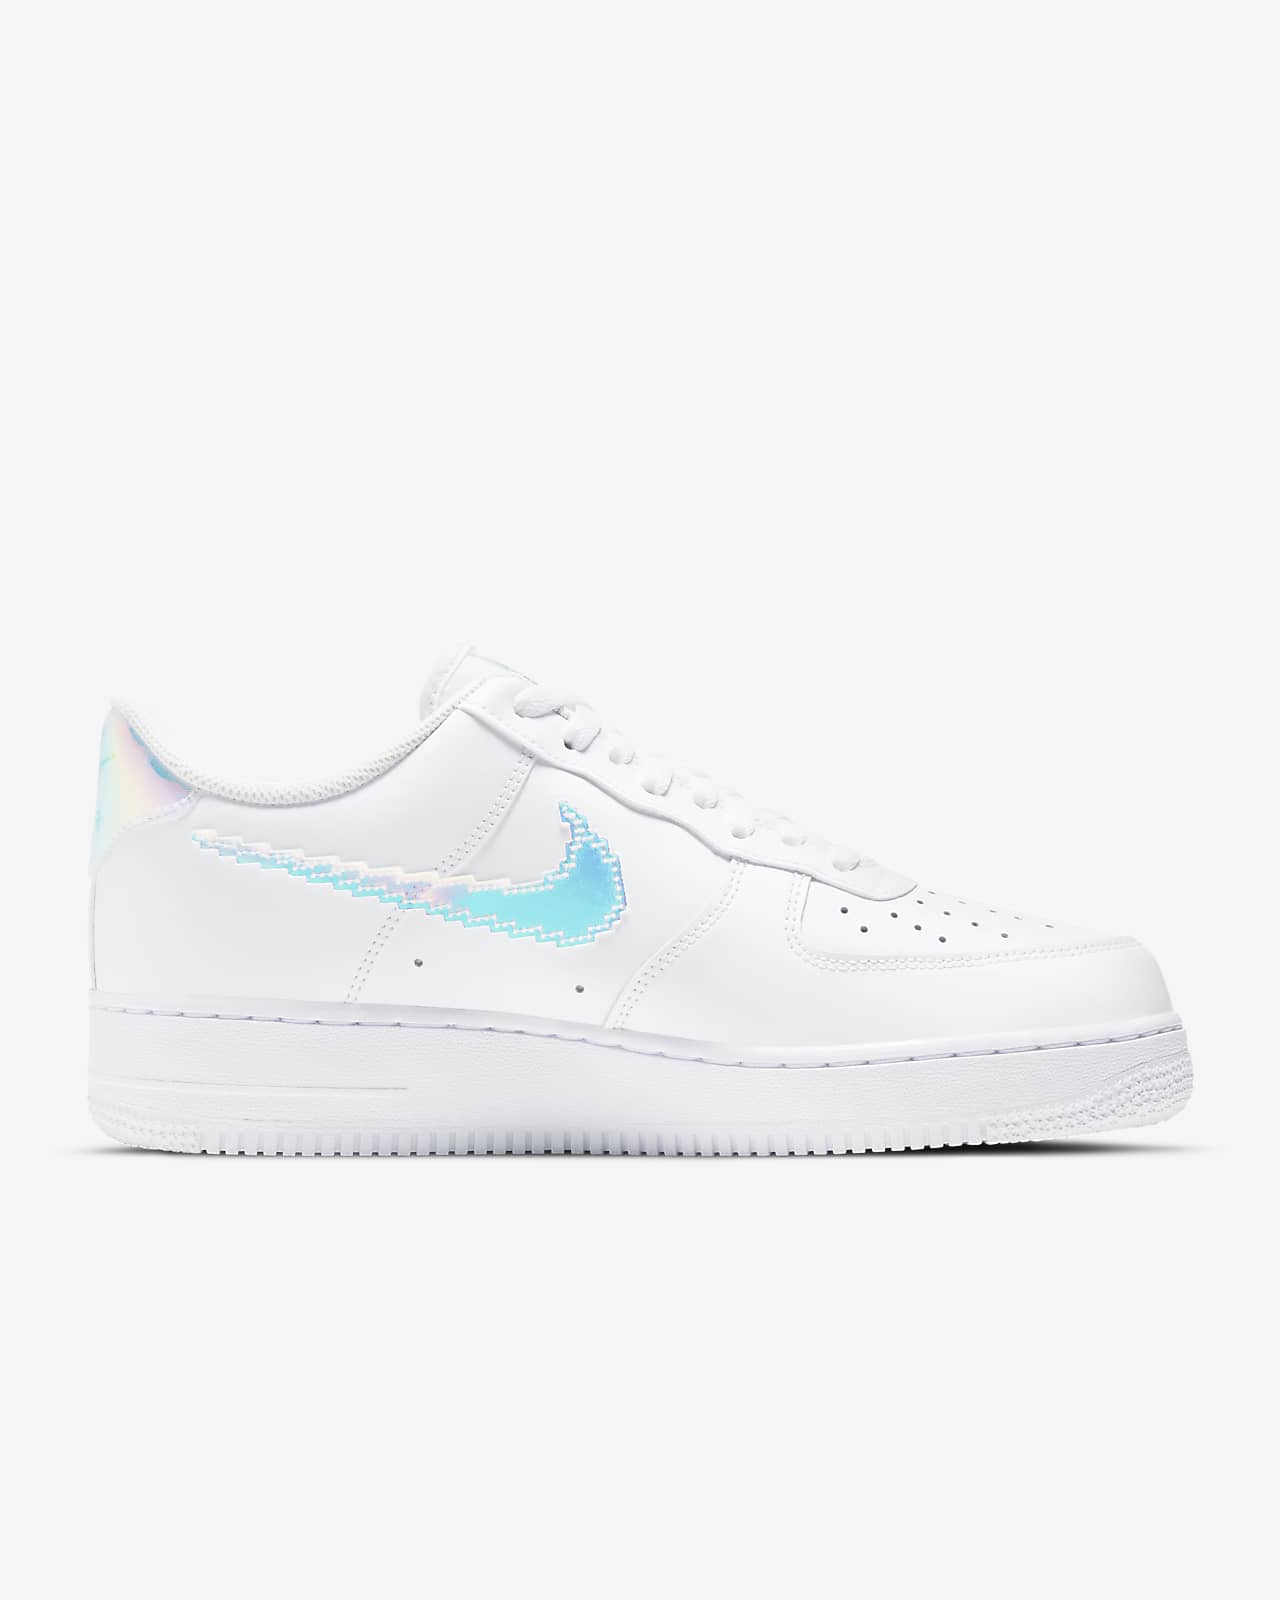 nike air force one lv8 men's